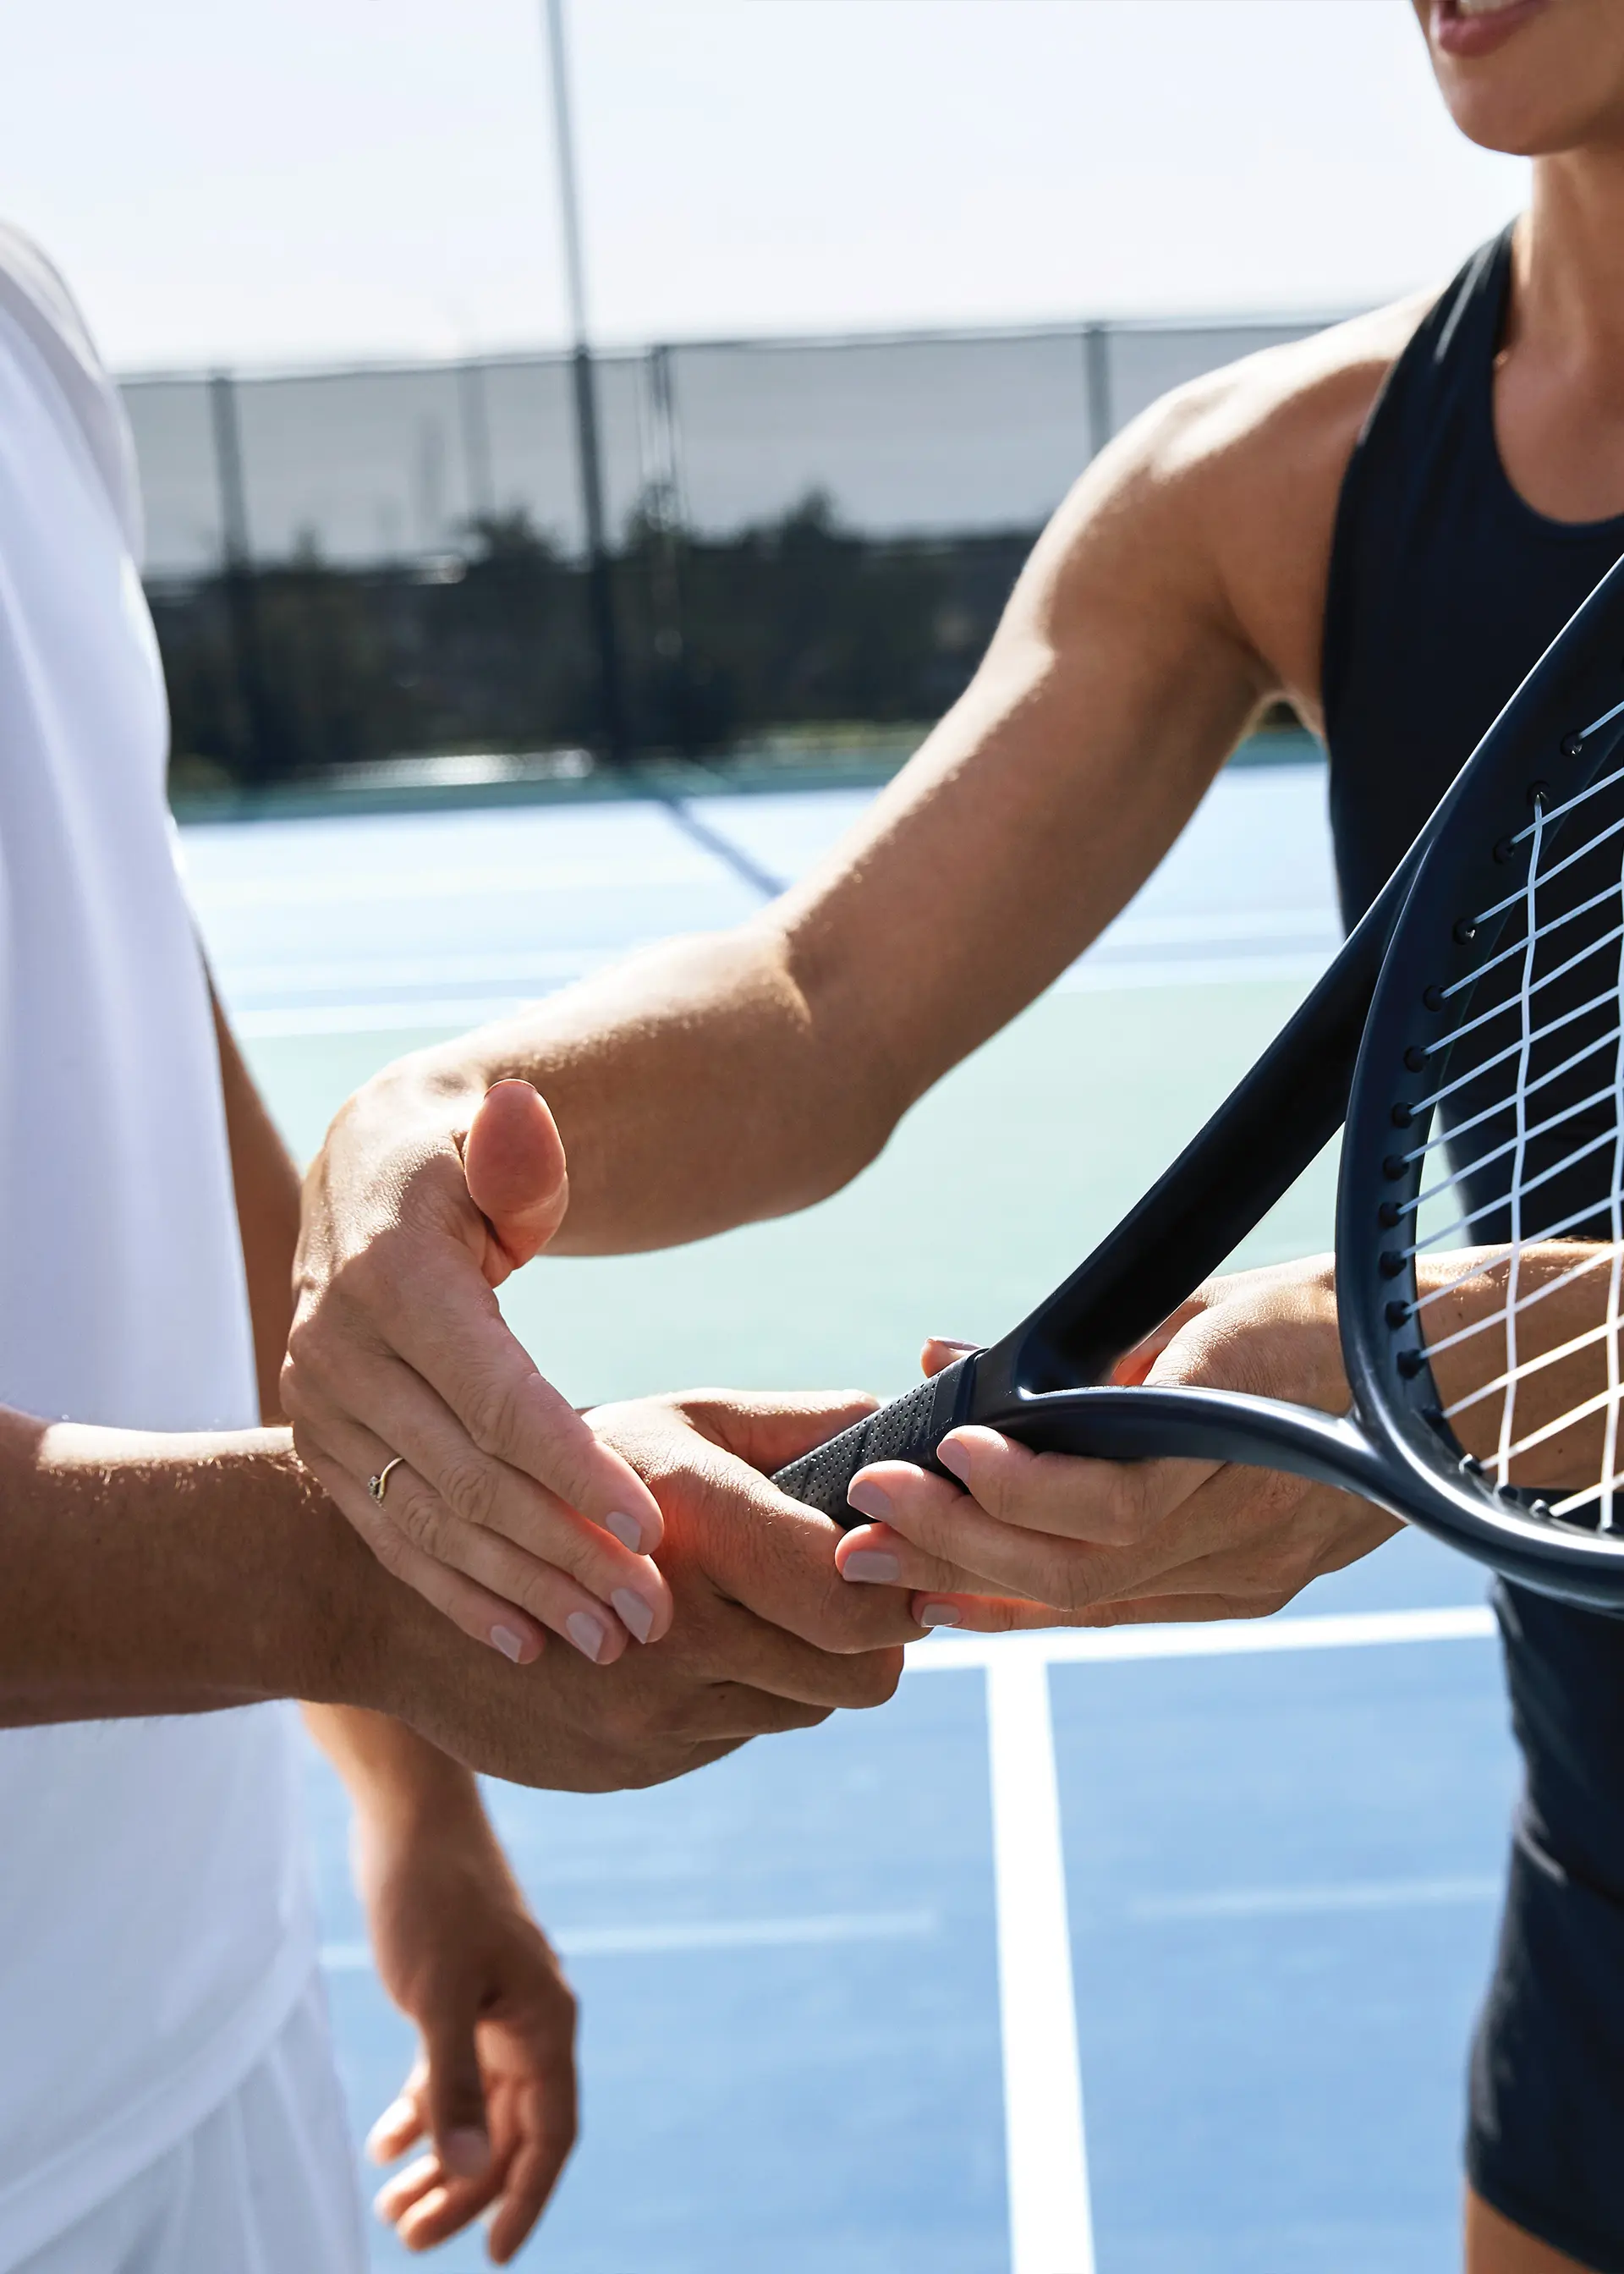 Two people holding a tennis racket on an outdoor court